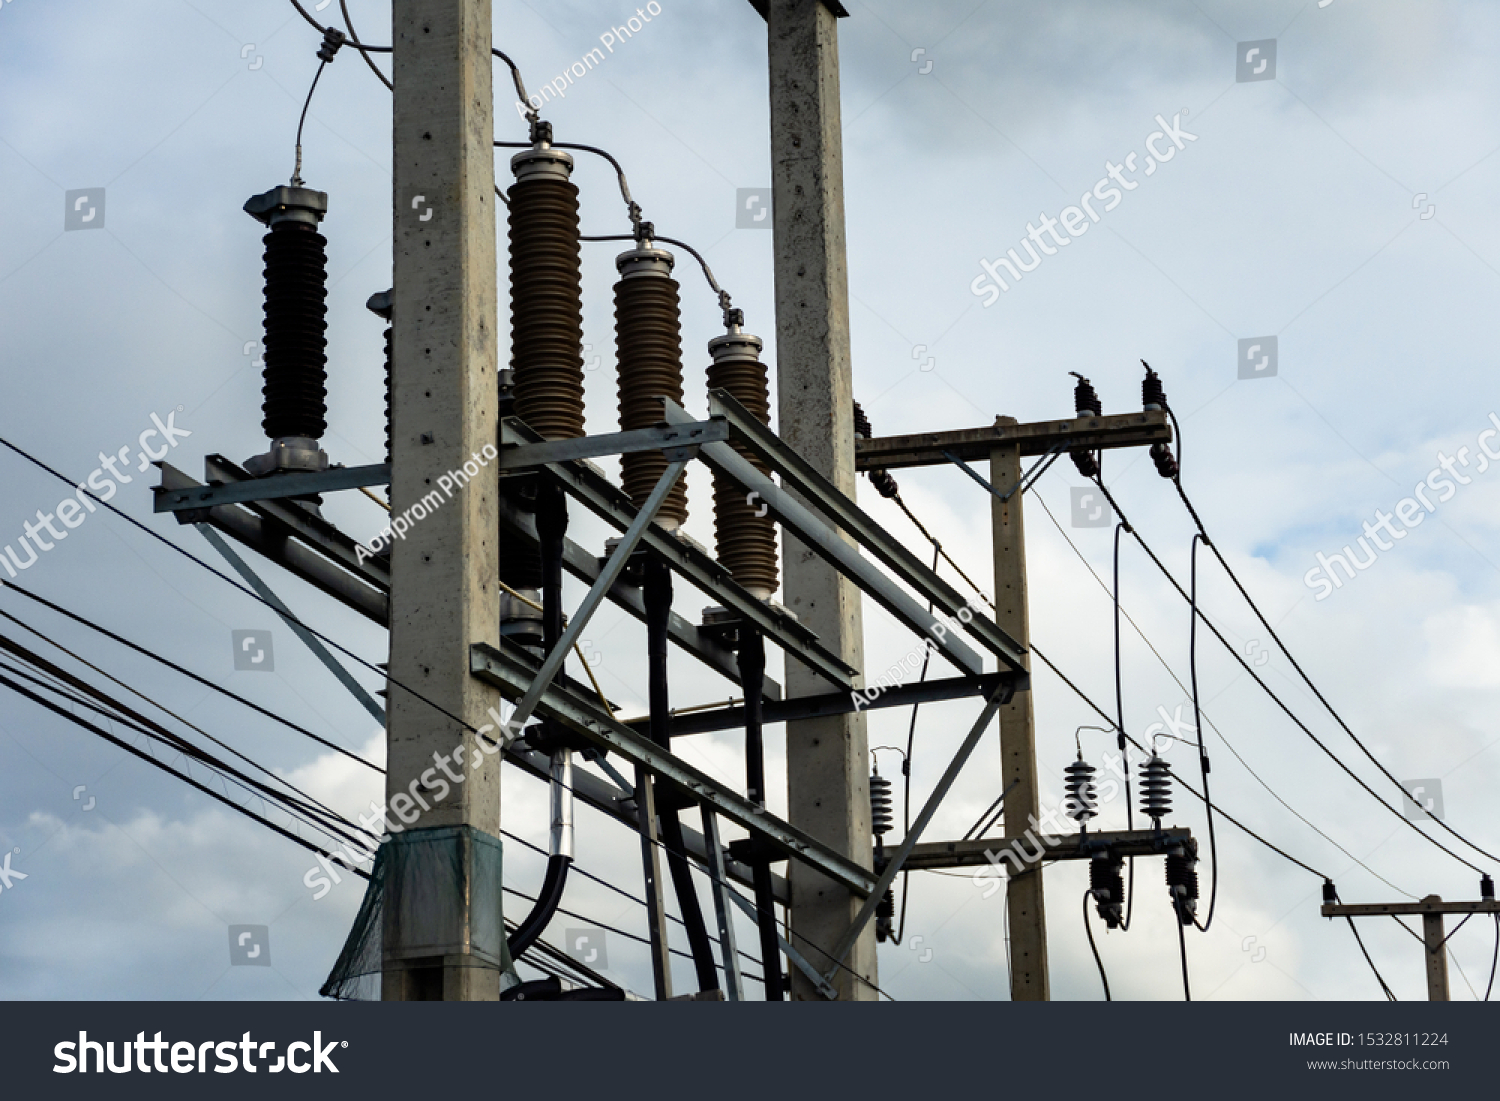 High voltage cables with electrical insulator and electrical equipment in power substation. #1532811224